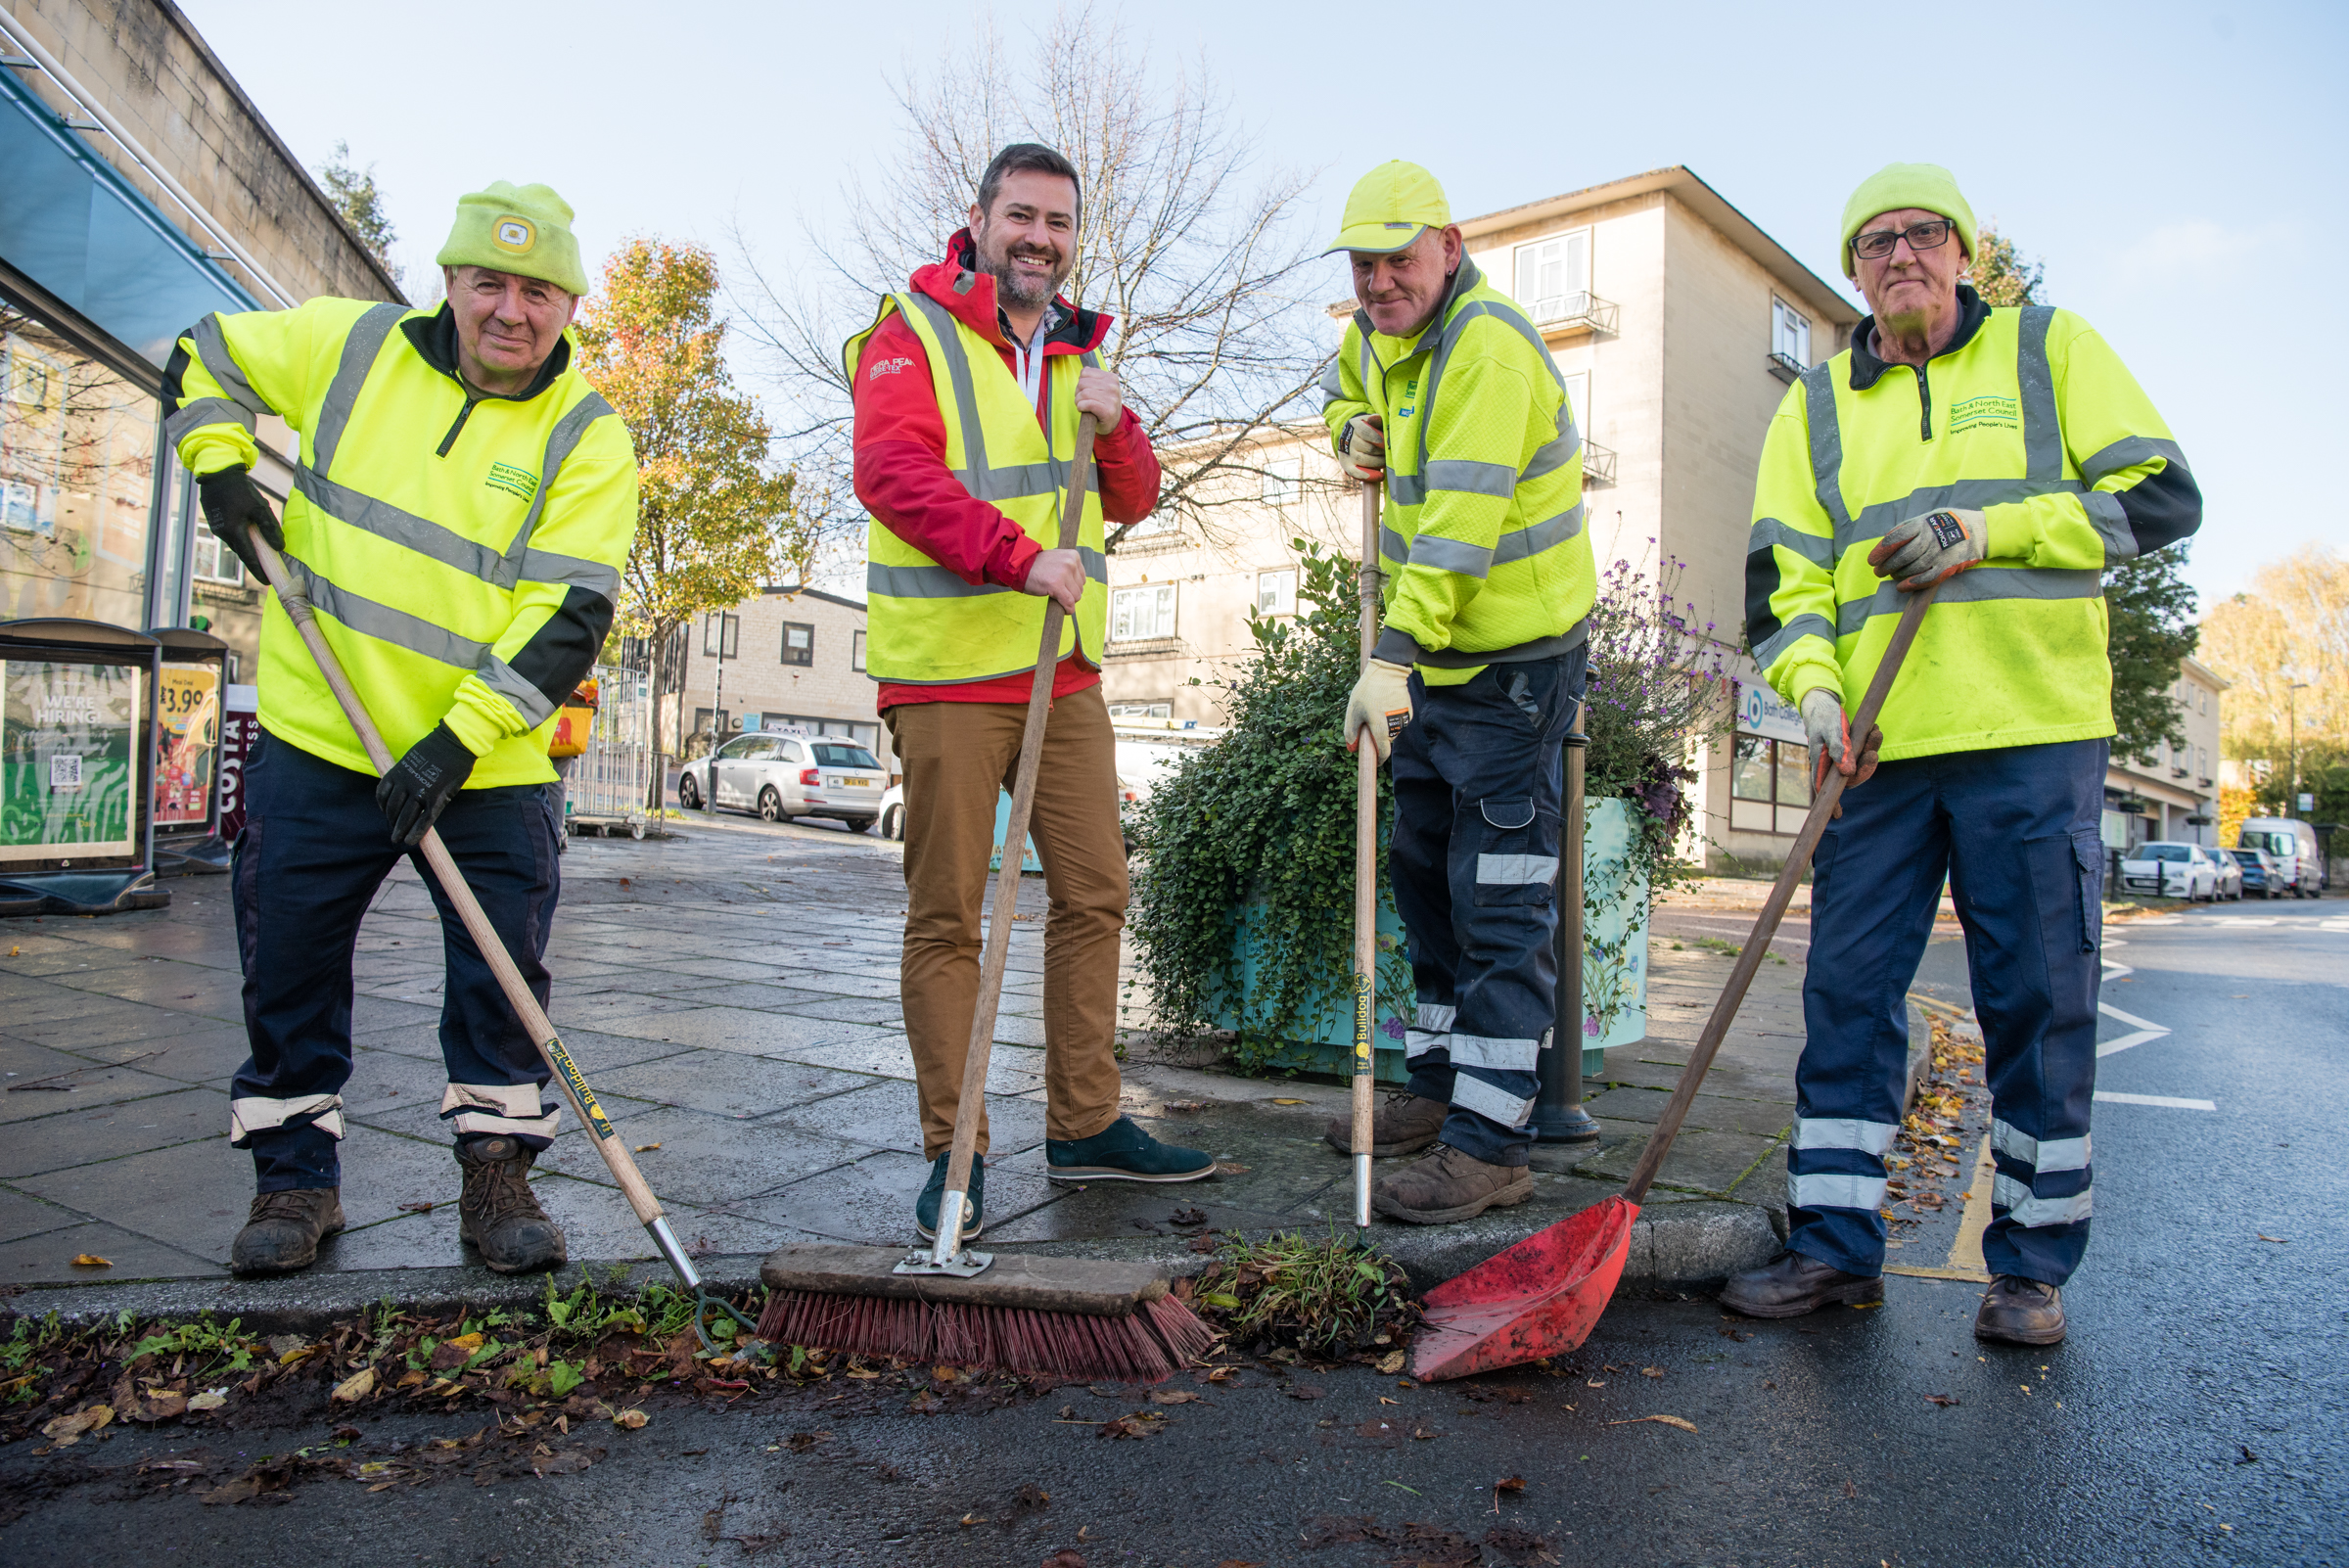 Hard-working team keeps Bath & North East Somerset clean and green   